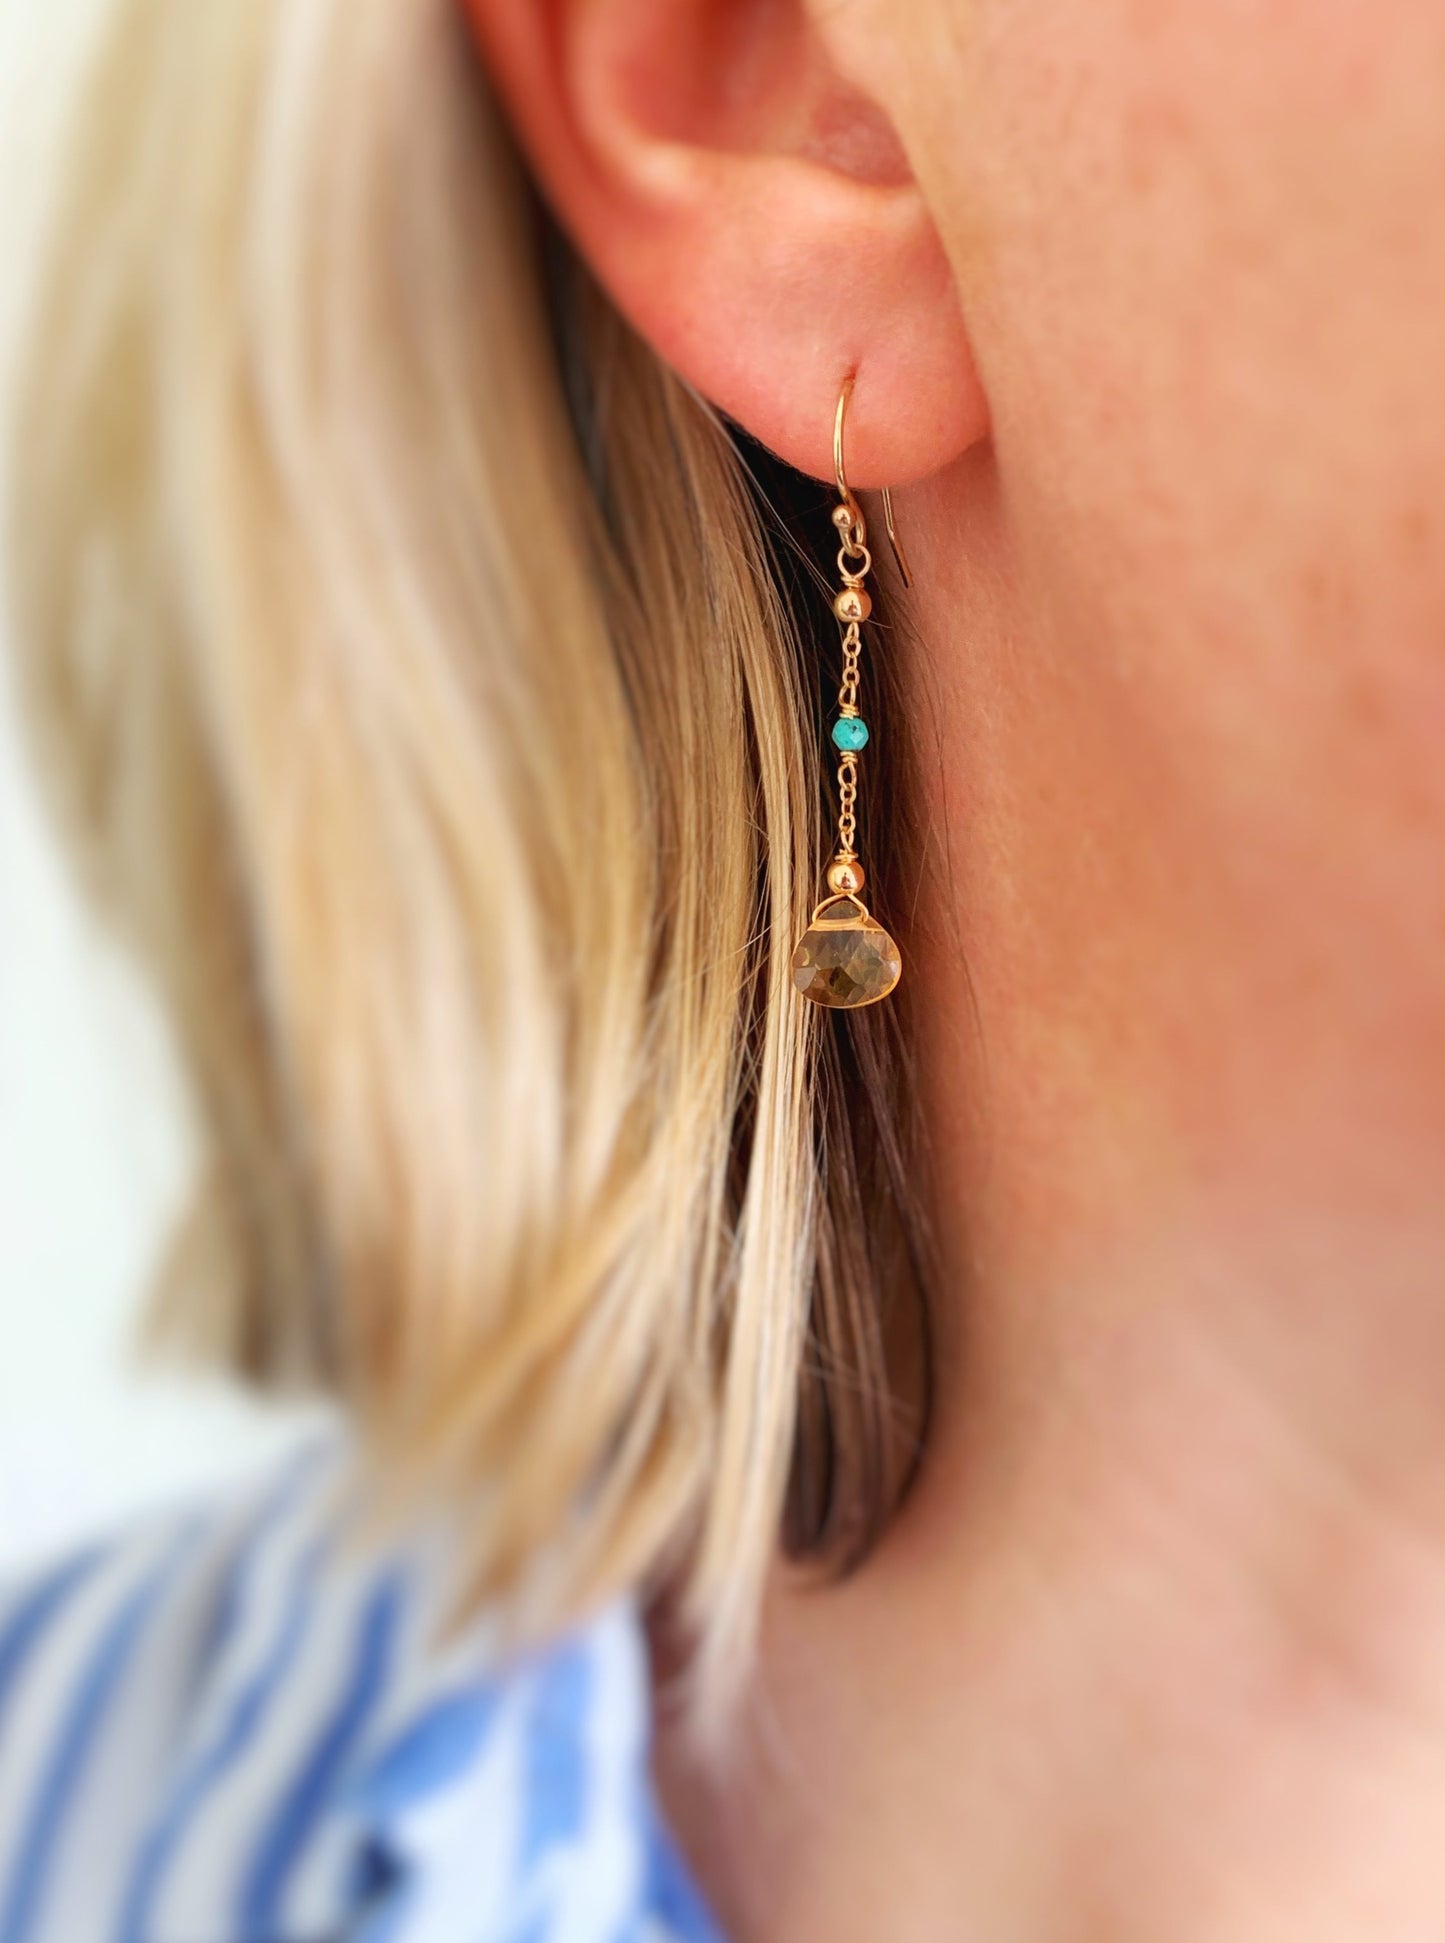 The ray of sunshine earring shown on a person's ear 